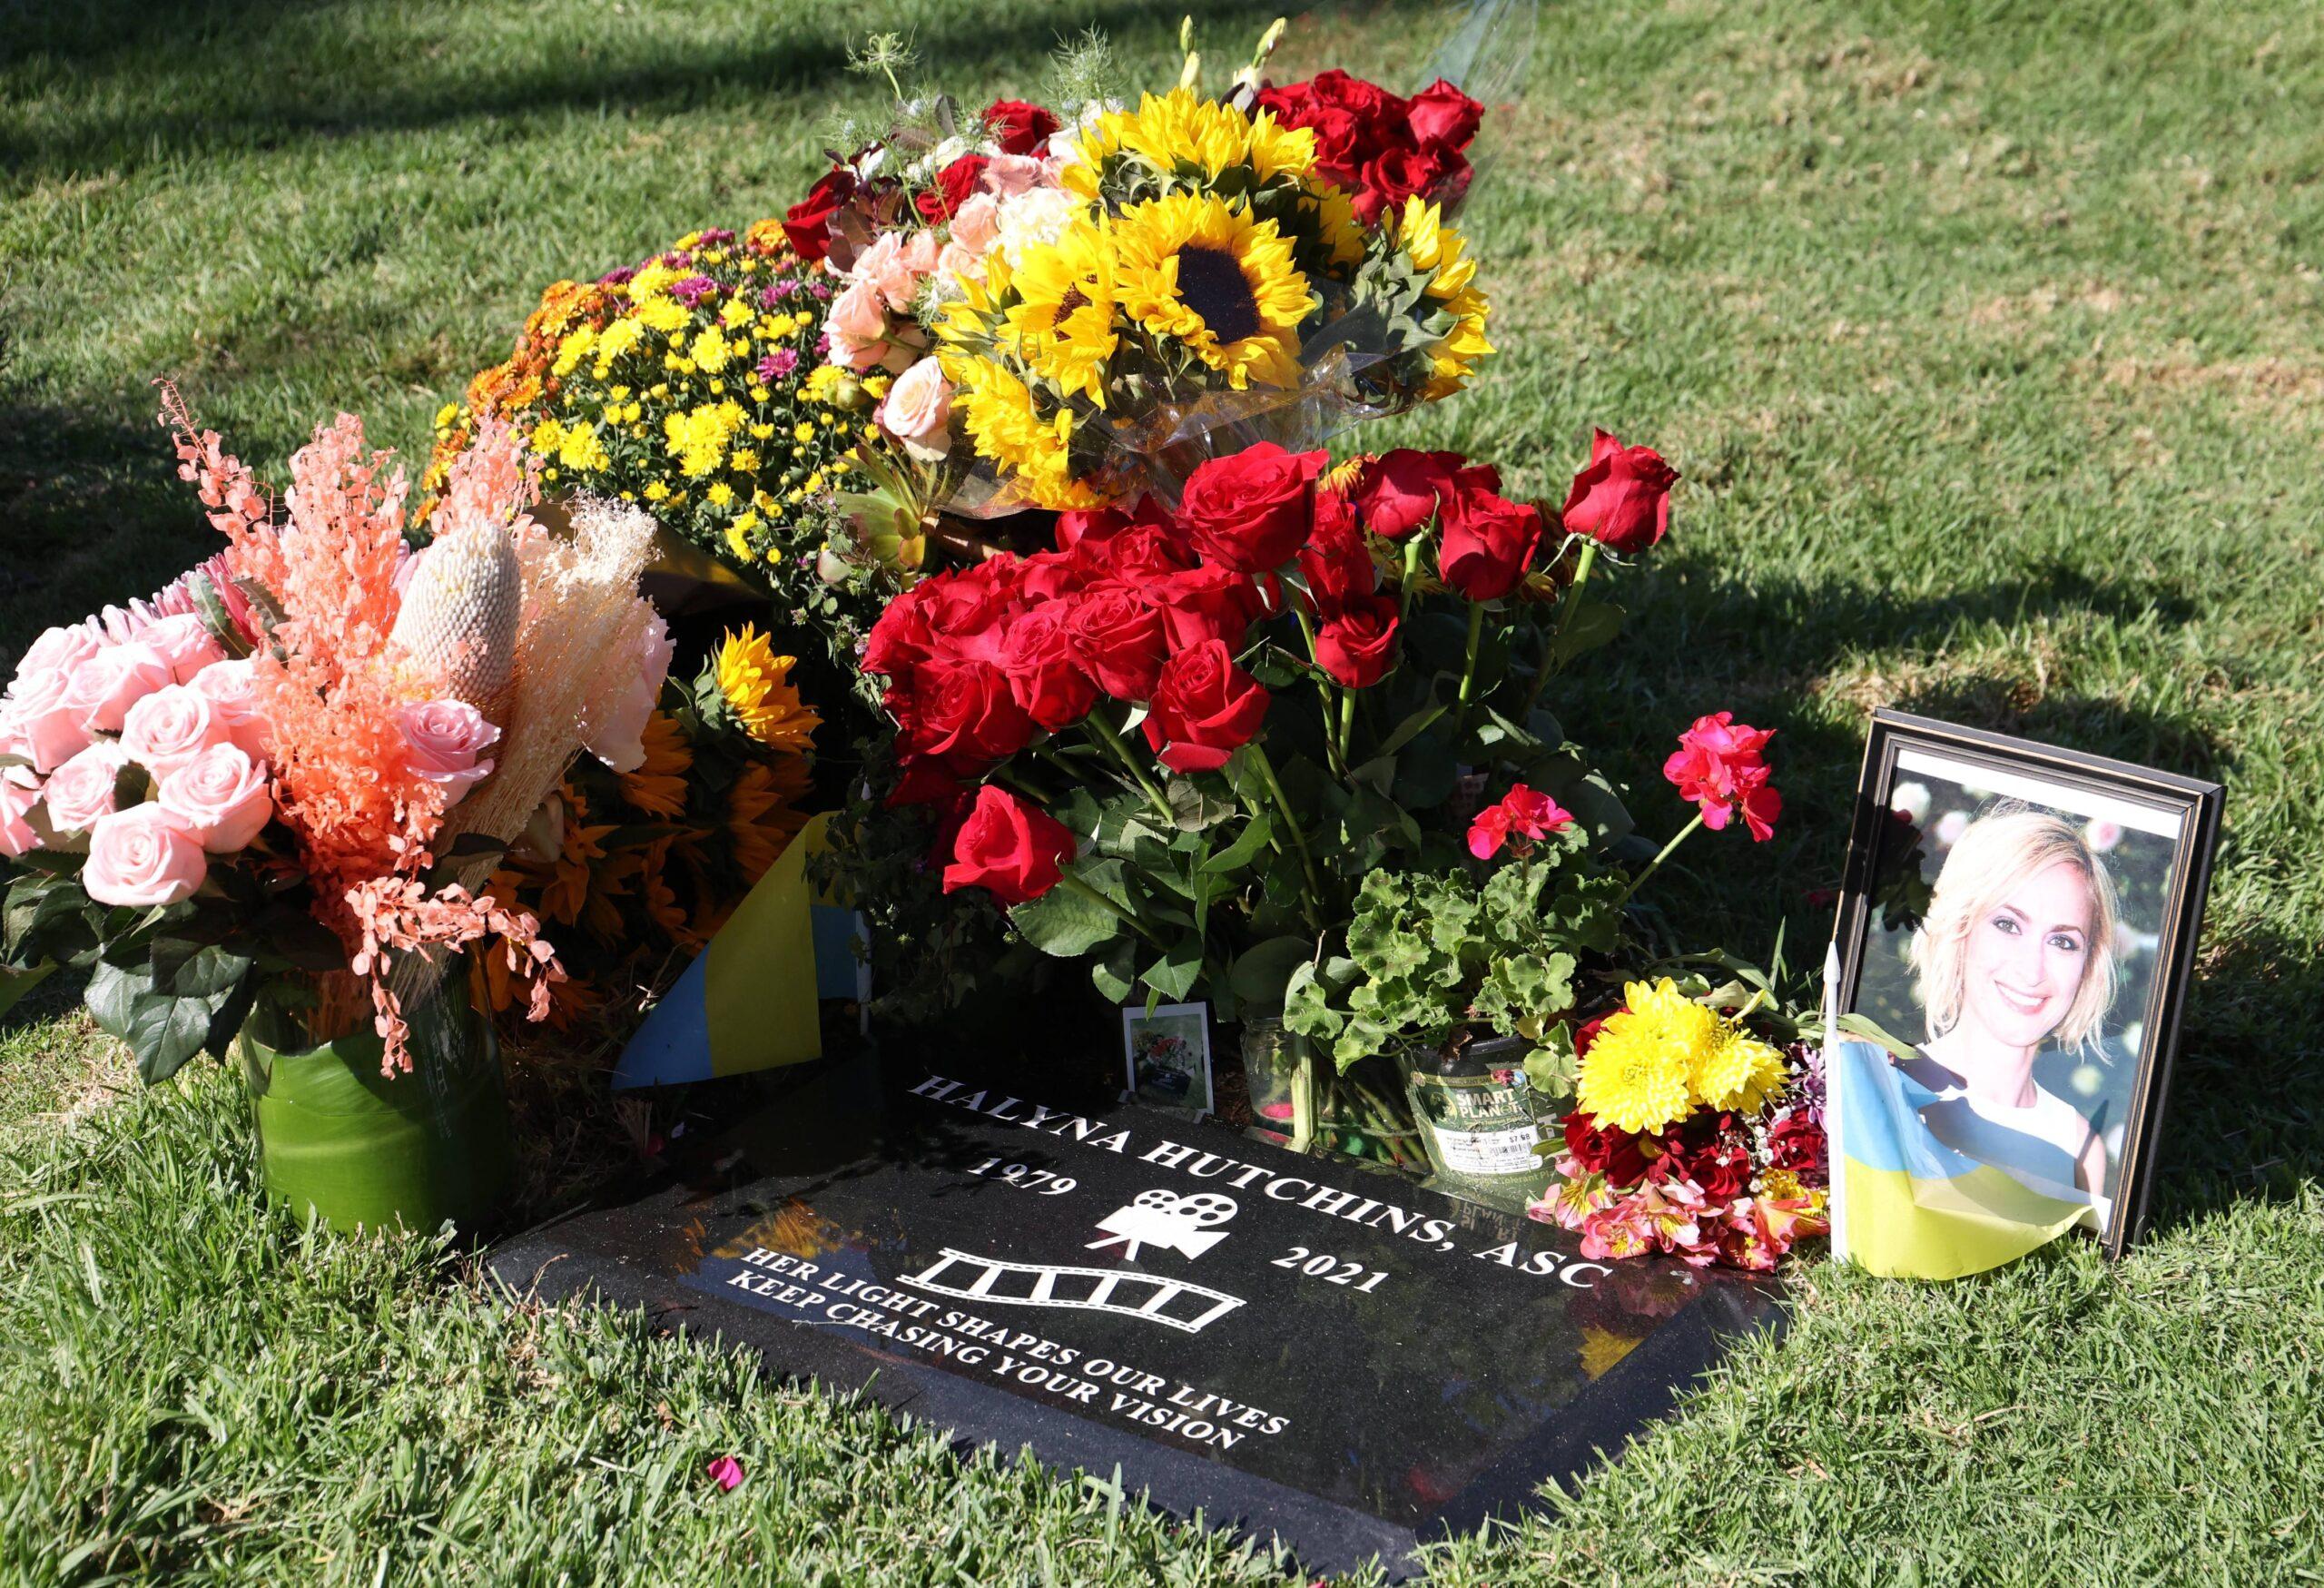 "Rust" movie shooting victim Halyna Hutchins mother, Olga traveled from Ukraine to Hollywood to lay flowers on her daughters grave on the 2nd anniversary of her death